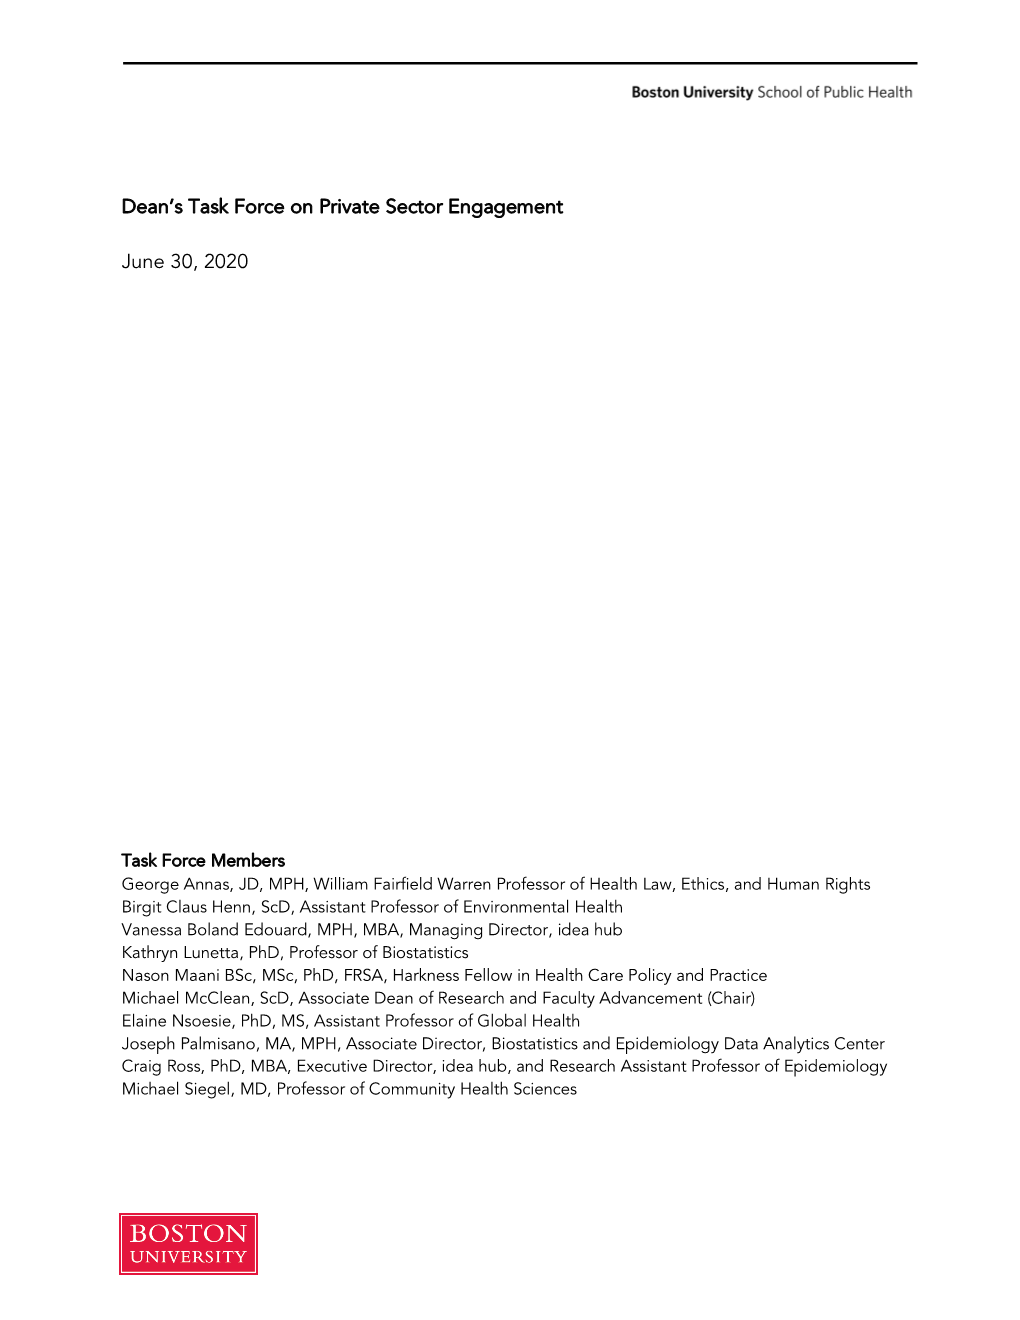 Dean's Task Force on Private Sector Engagement | June 30, 2020 1